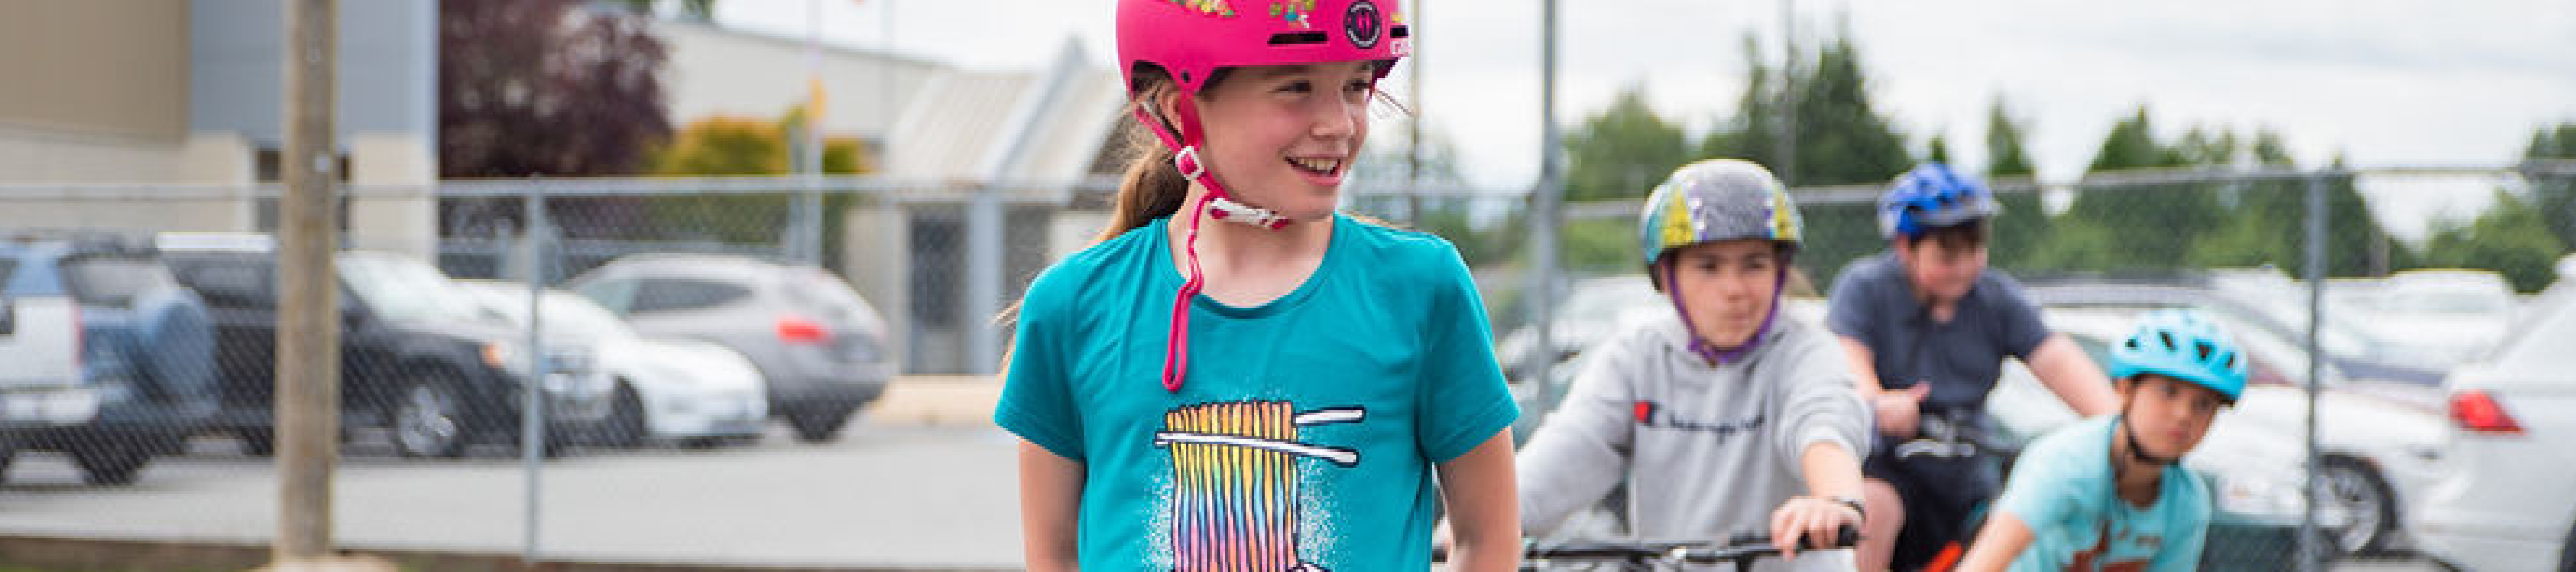 A young girl about 11 years old sites on her bike and smiles off into the distance. She is wearing a blue shirt and pink helmet. 